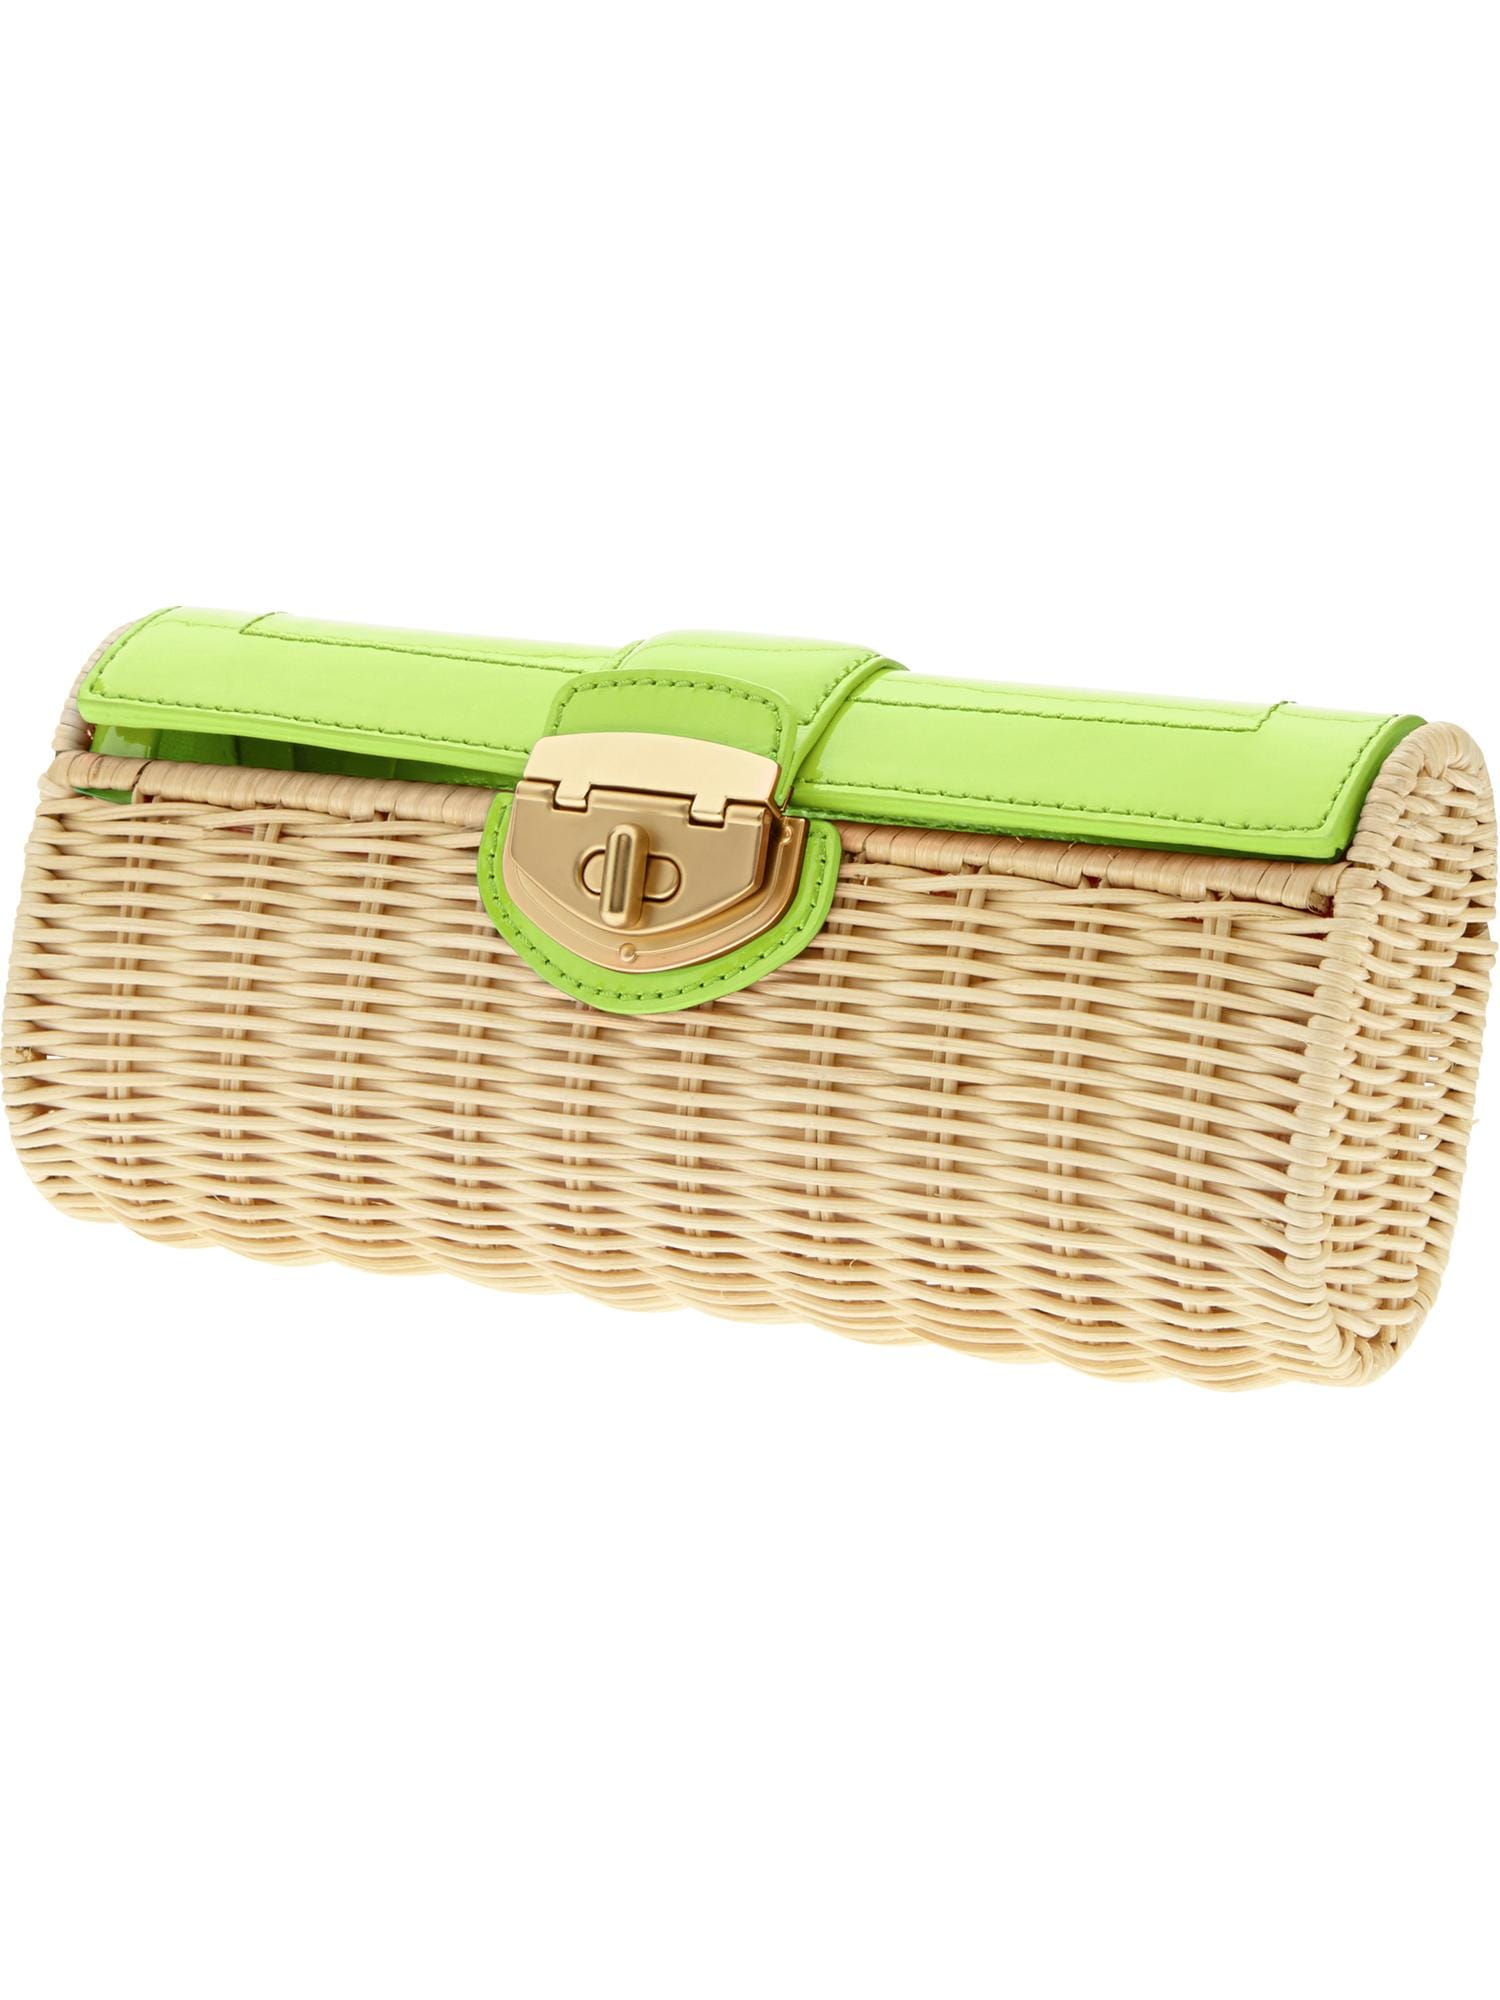 Milly Collection Patent Wicker Clutch